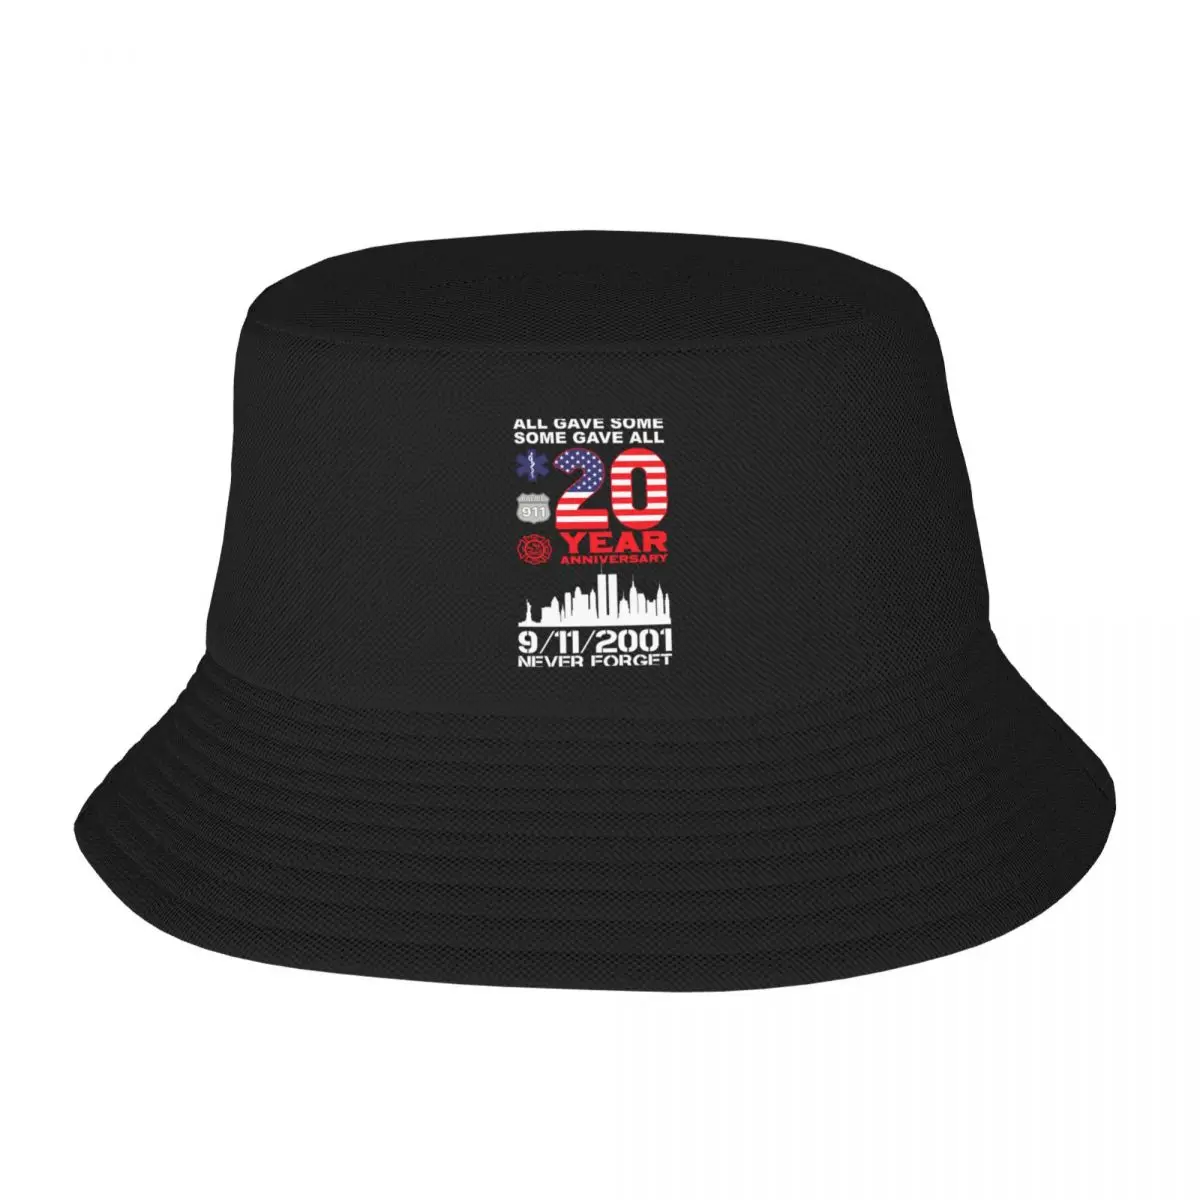 

New patriot day never forget 9 11 2001 anniversary Bucket Hat sun hat fishing hat black fashionable Women's Hats 2023 Men's